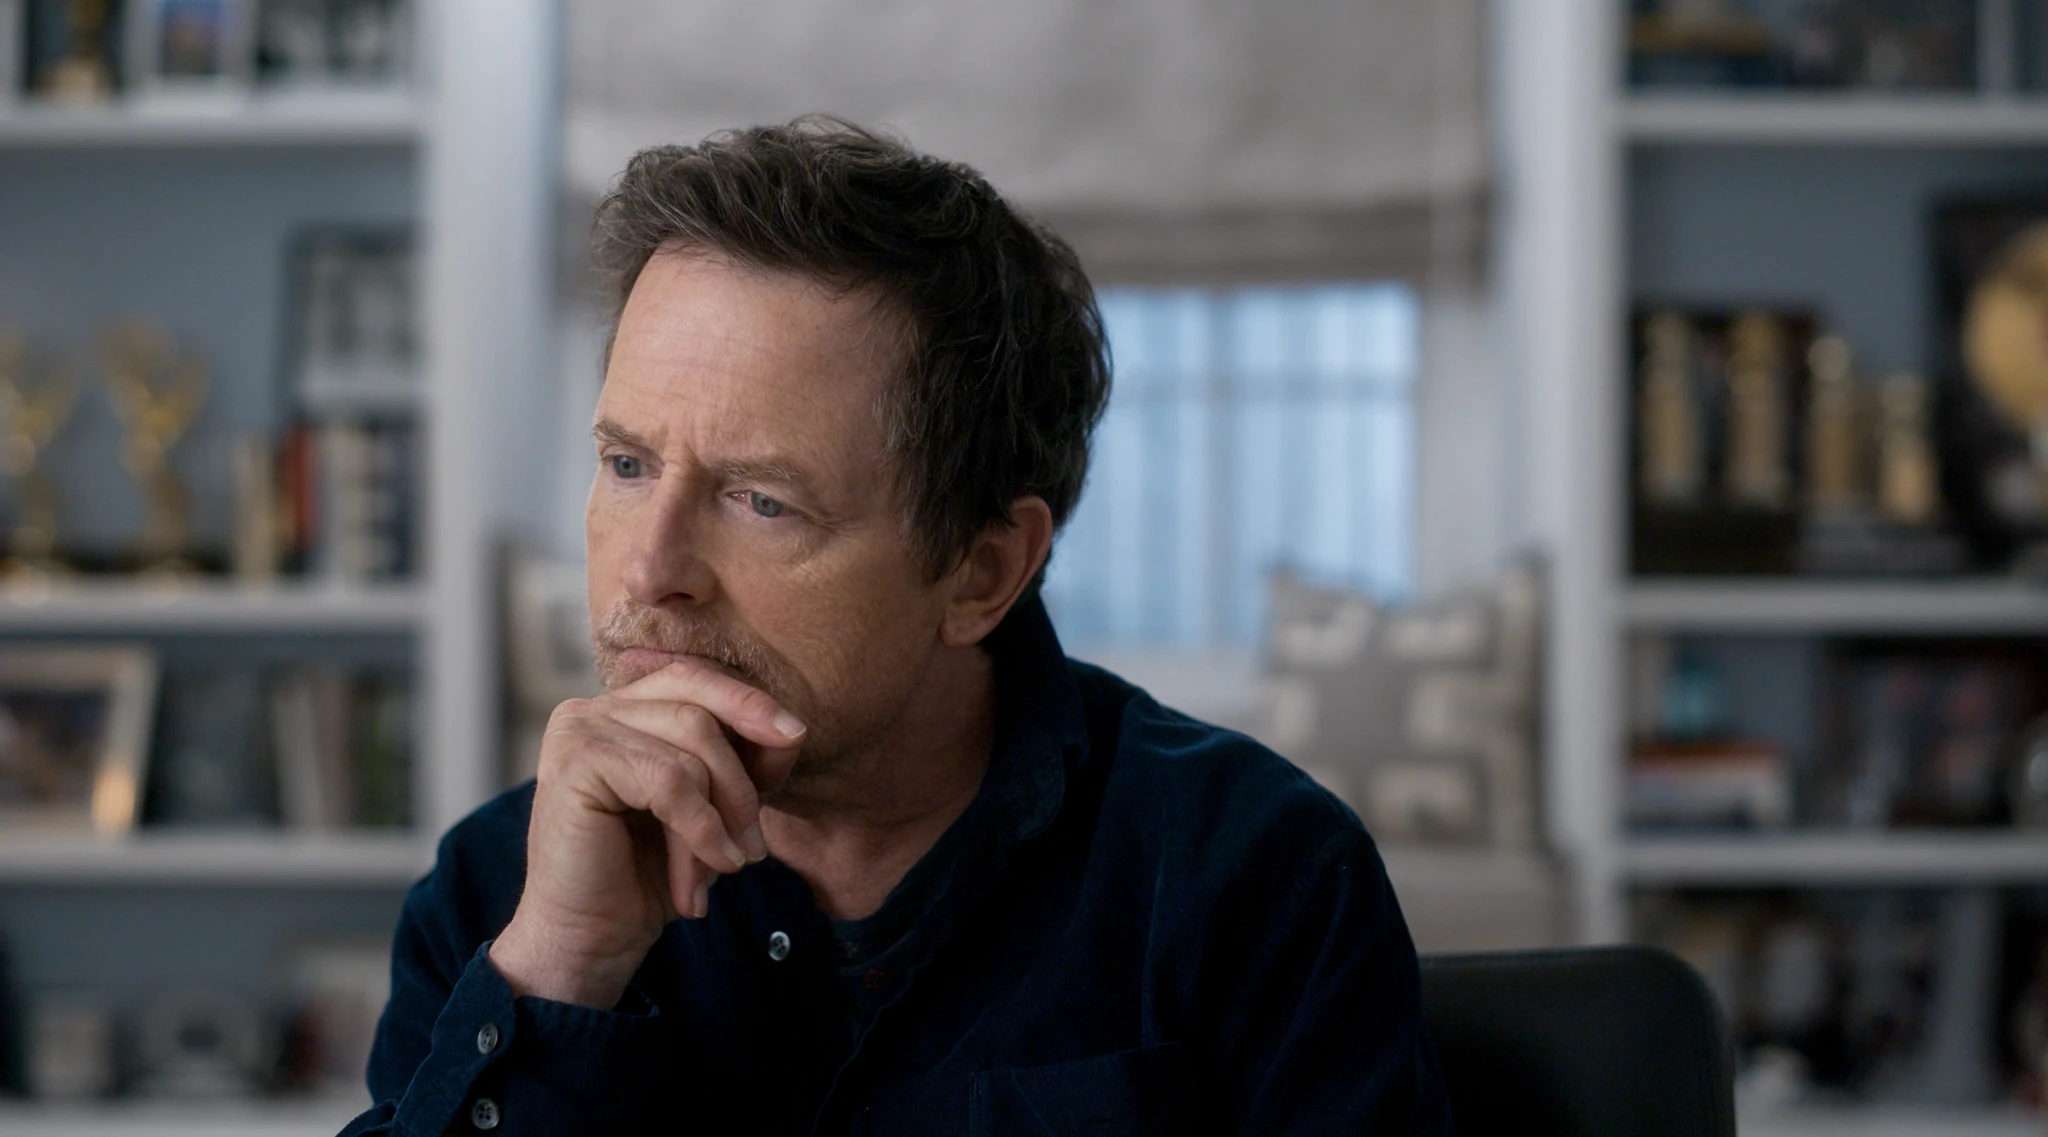 Michael J. Fox Reflects on His Life's Story in Trailer for 'Still: A Michael J. Fox Movie'